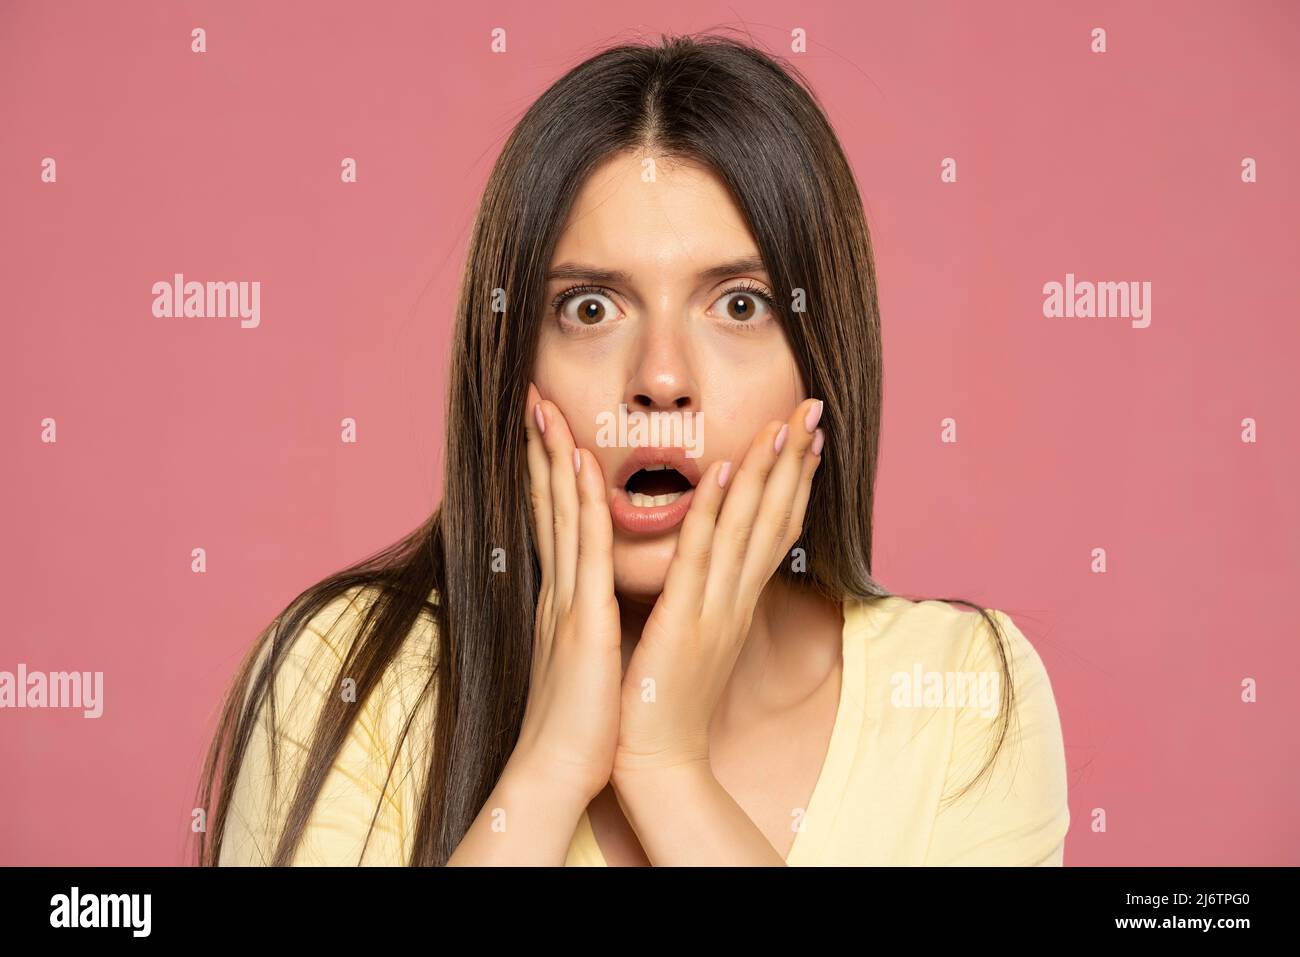 Shocking News. Surprised and Calm Woman Covers Her Mouth, Close-up,  Isolated on a White Background Stock Photo - Image of white, studio:  195679150